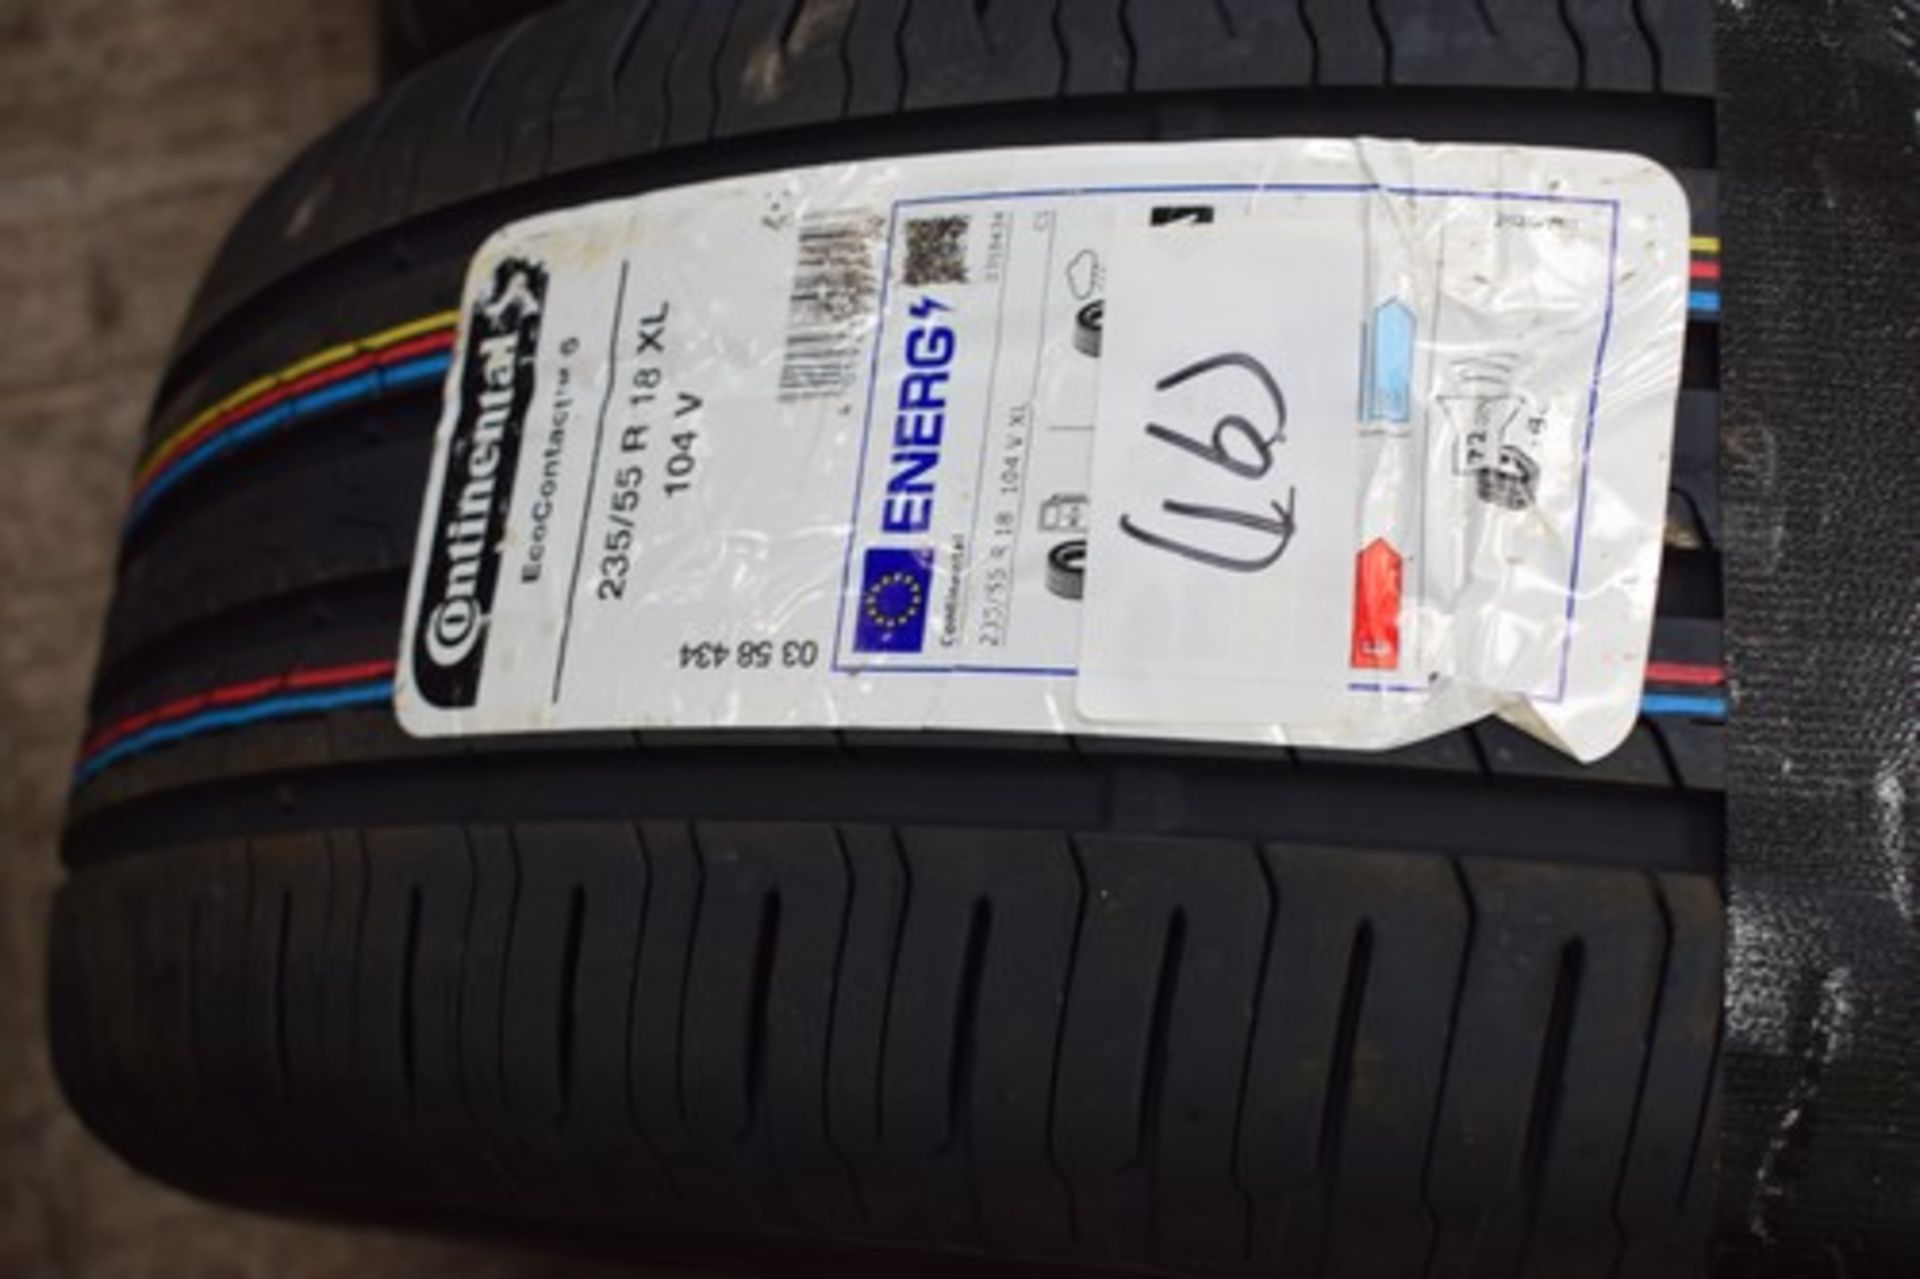 1 x Continental Eco Contact 6 tyre, size 235/55R18 104V XL - new with label (C2)(16)